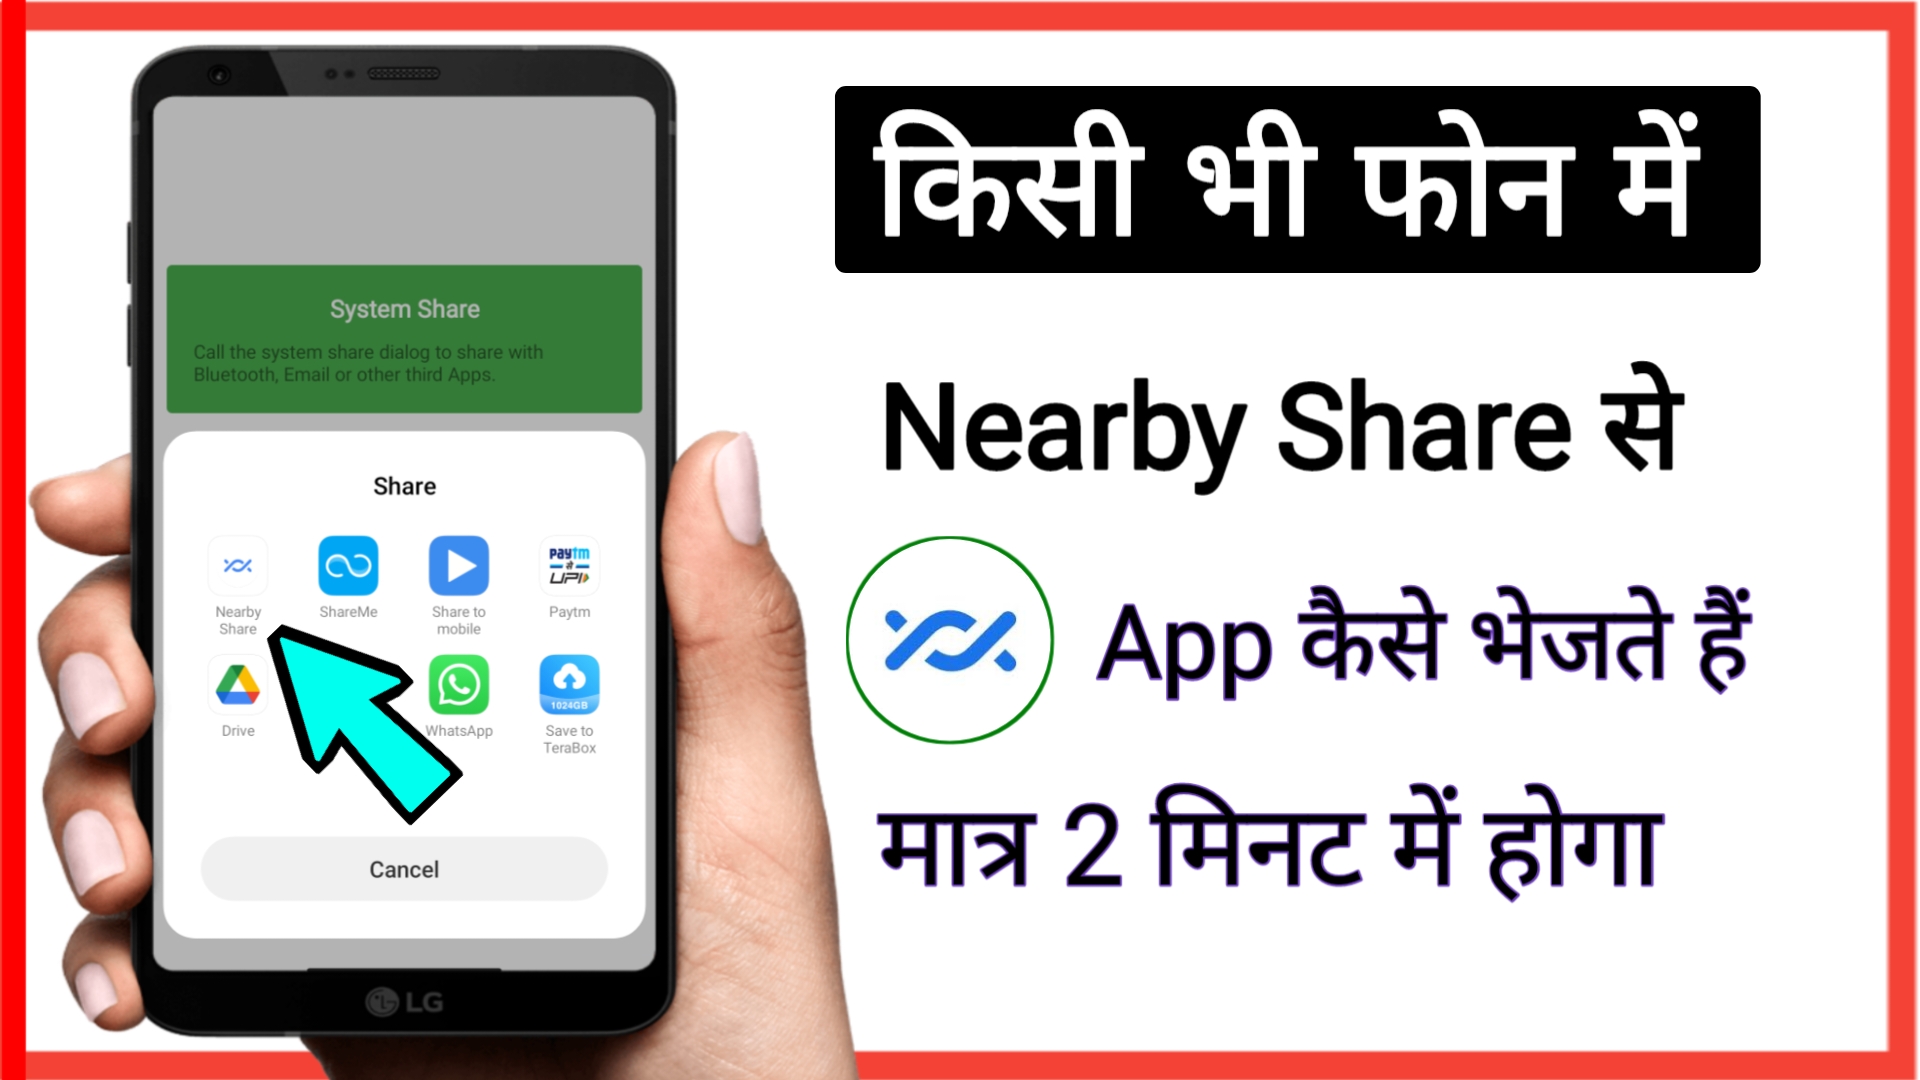 Nearby share se app kaise bheje